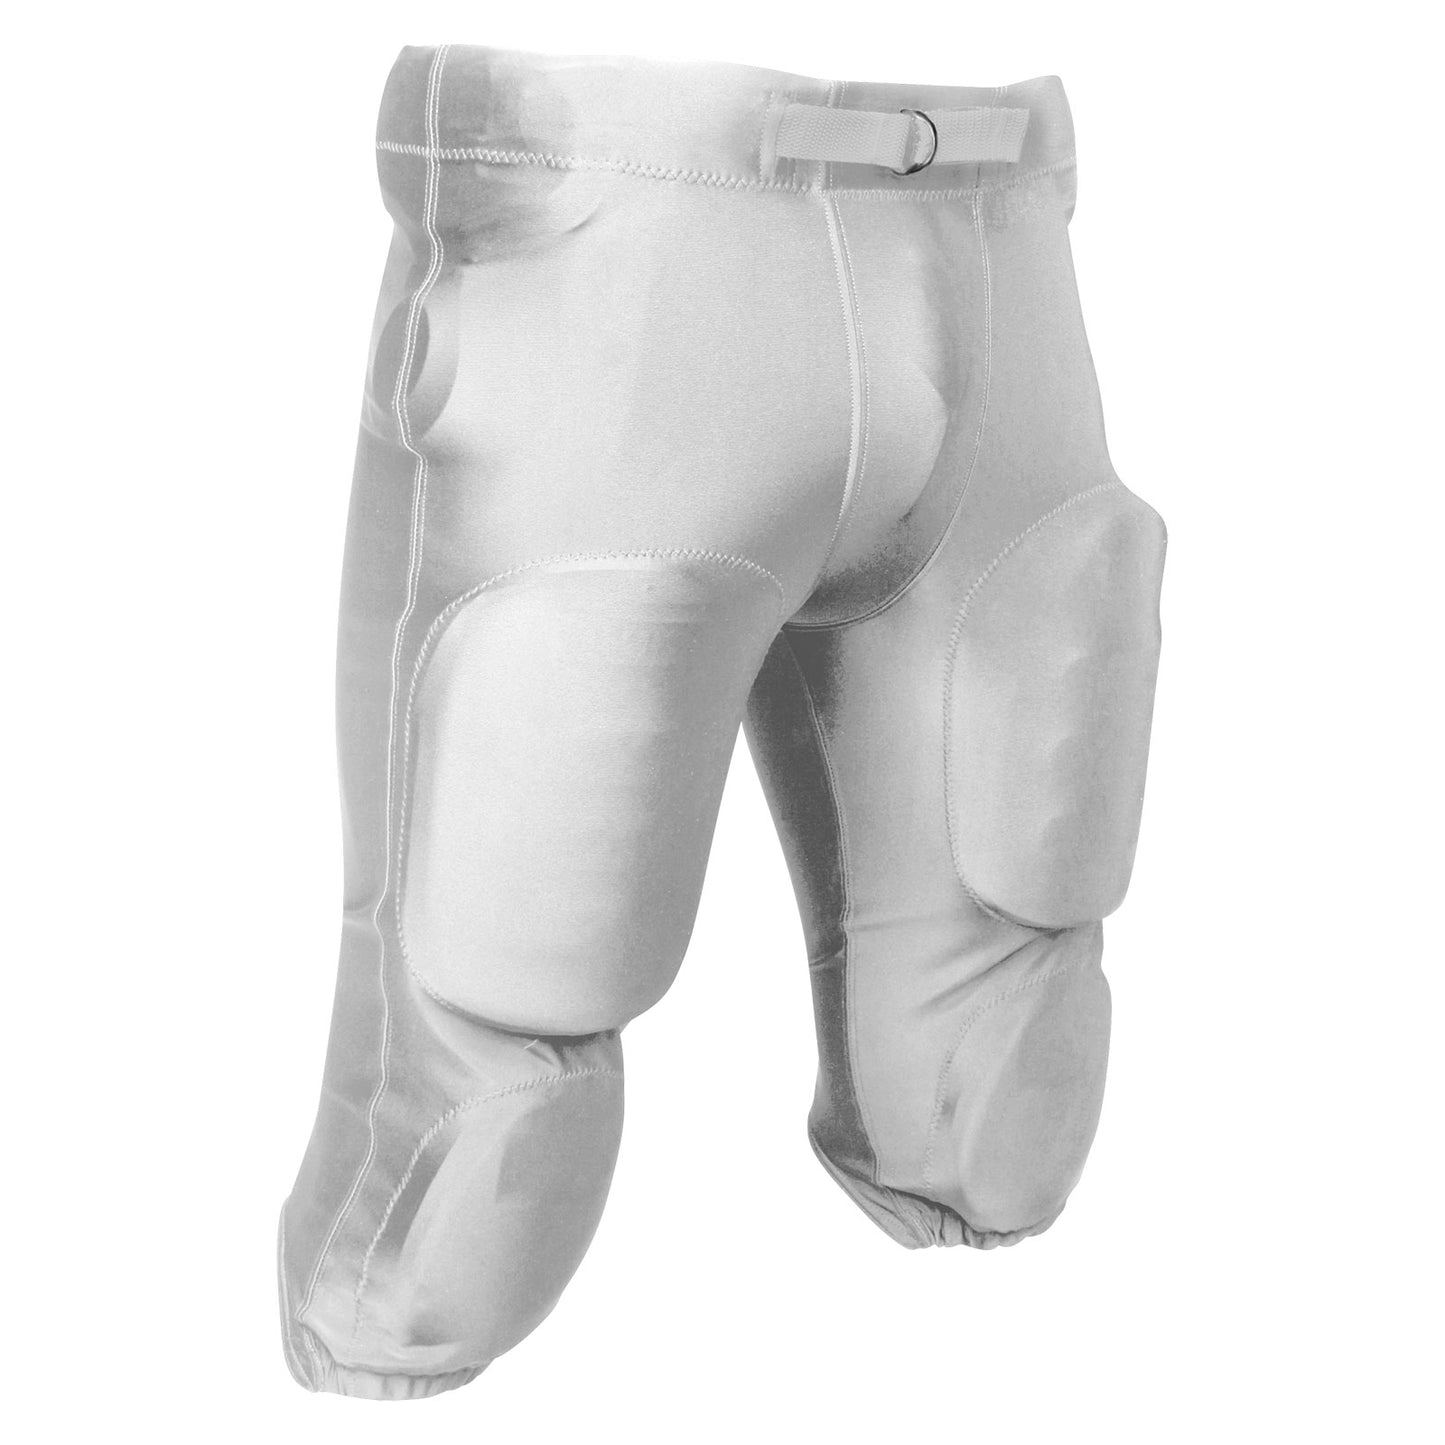 Traditional Football Pant With Pad Pockets WHITE BODY